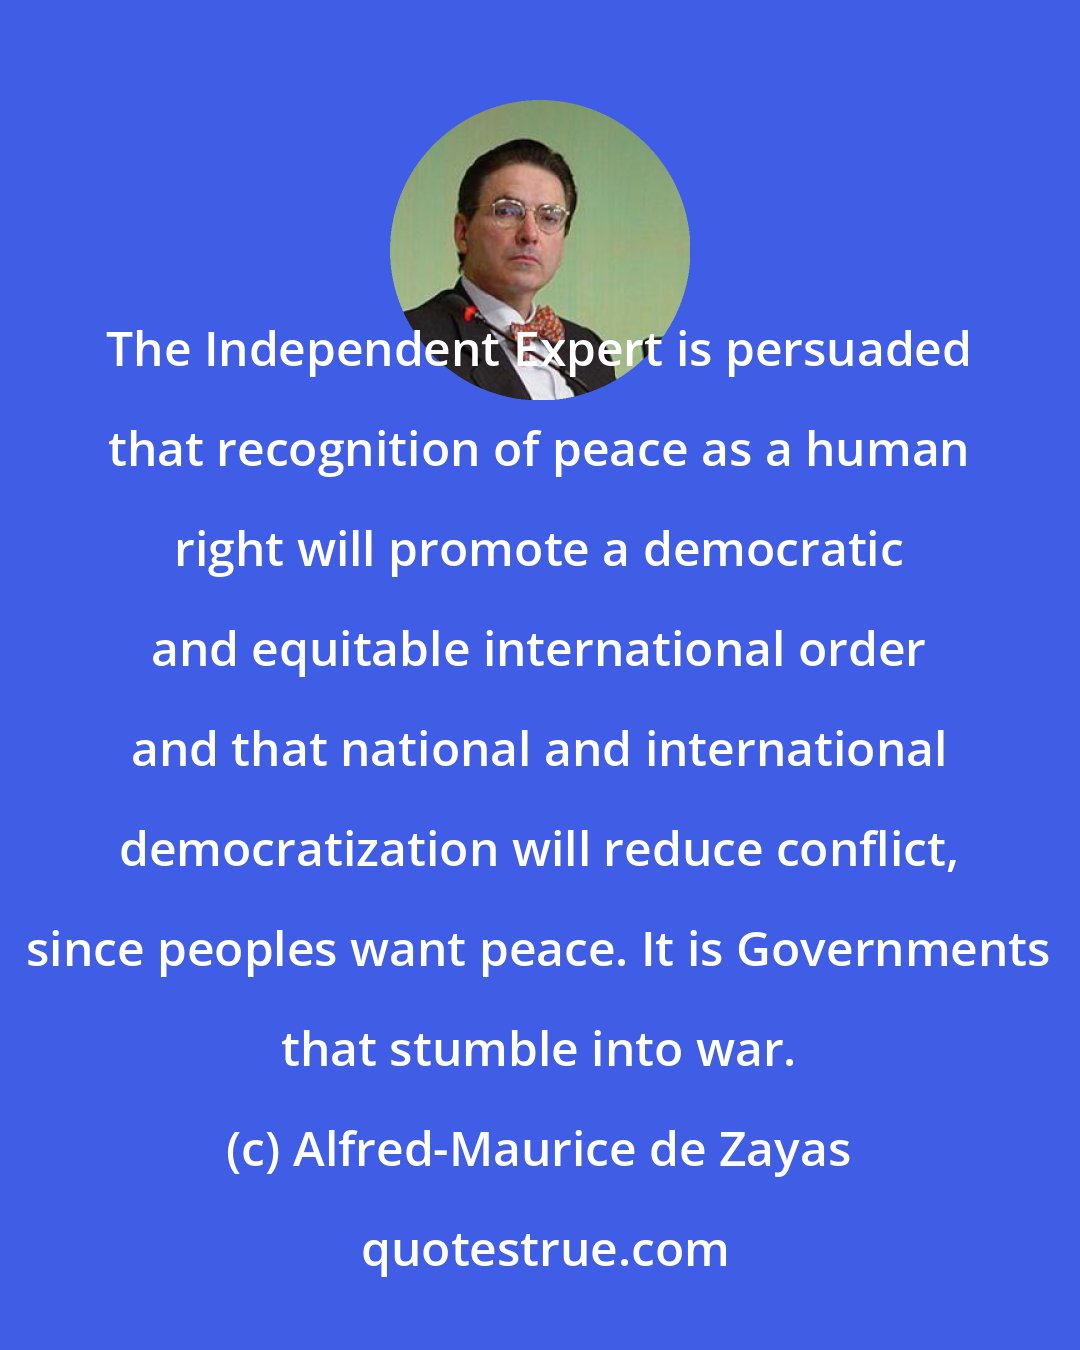 Alfred-Maurice de Zayas: The Independent Expert is persuaded that recognition of peace as a human right will promote a democratic and equitable international order and that national and international democratization will reduce conflict, since peoples want peace. It is Governments that stumble into war.